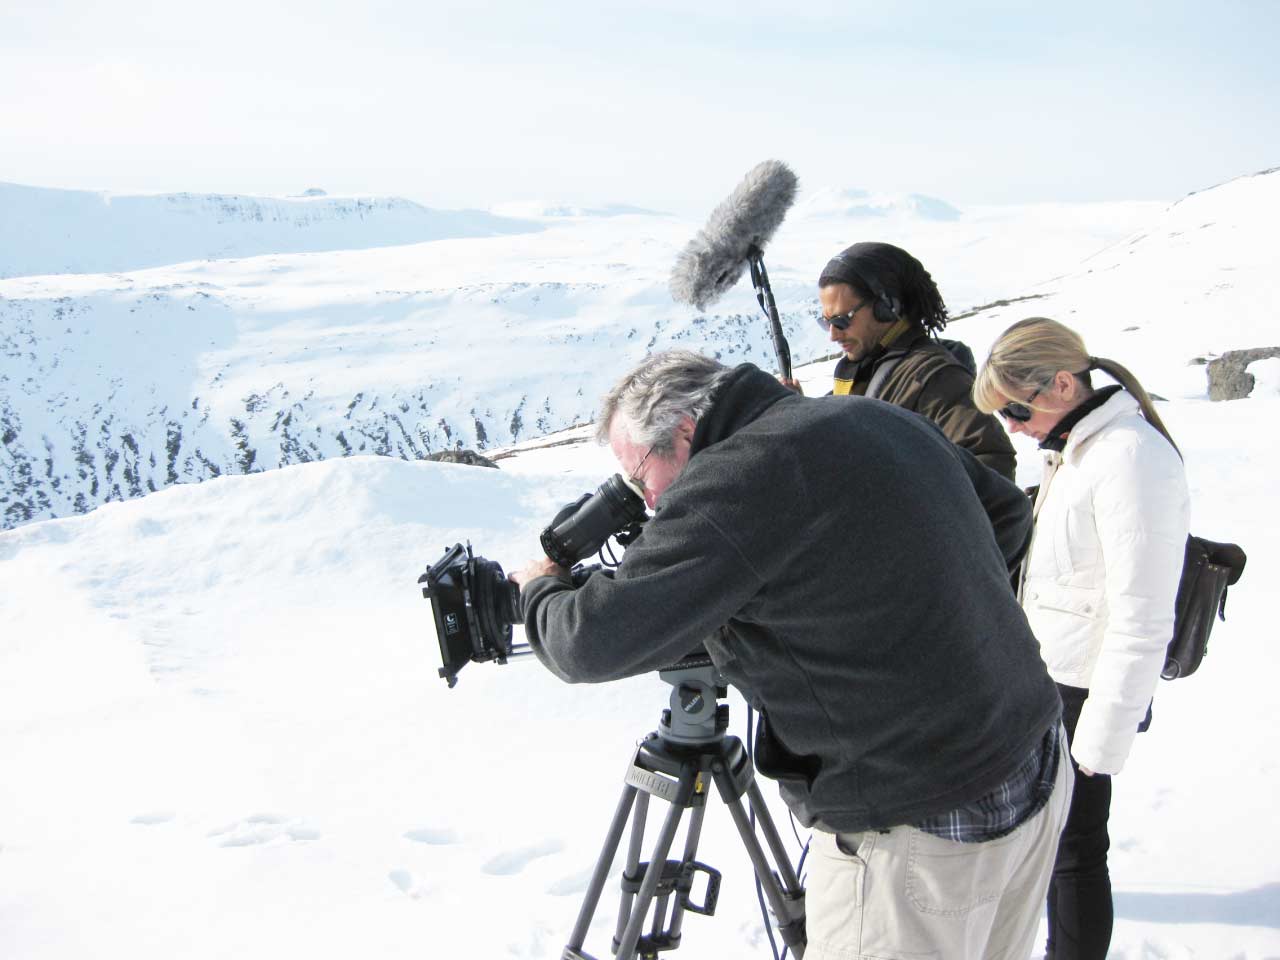 Our services include TV Production, feature Films, Corporate film and Online Media